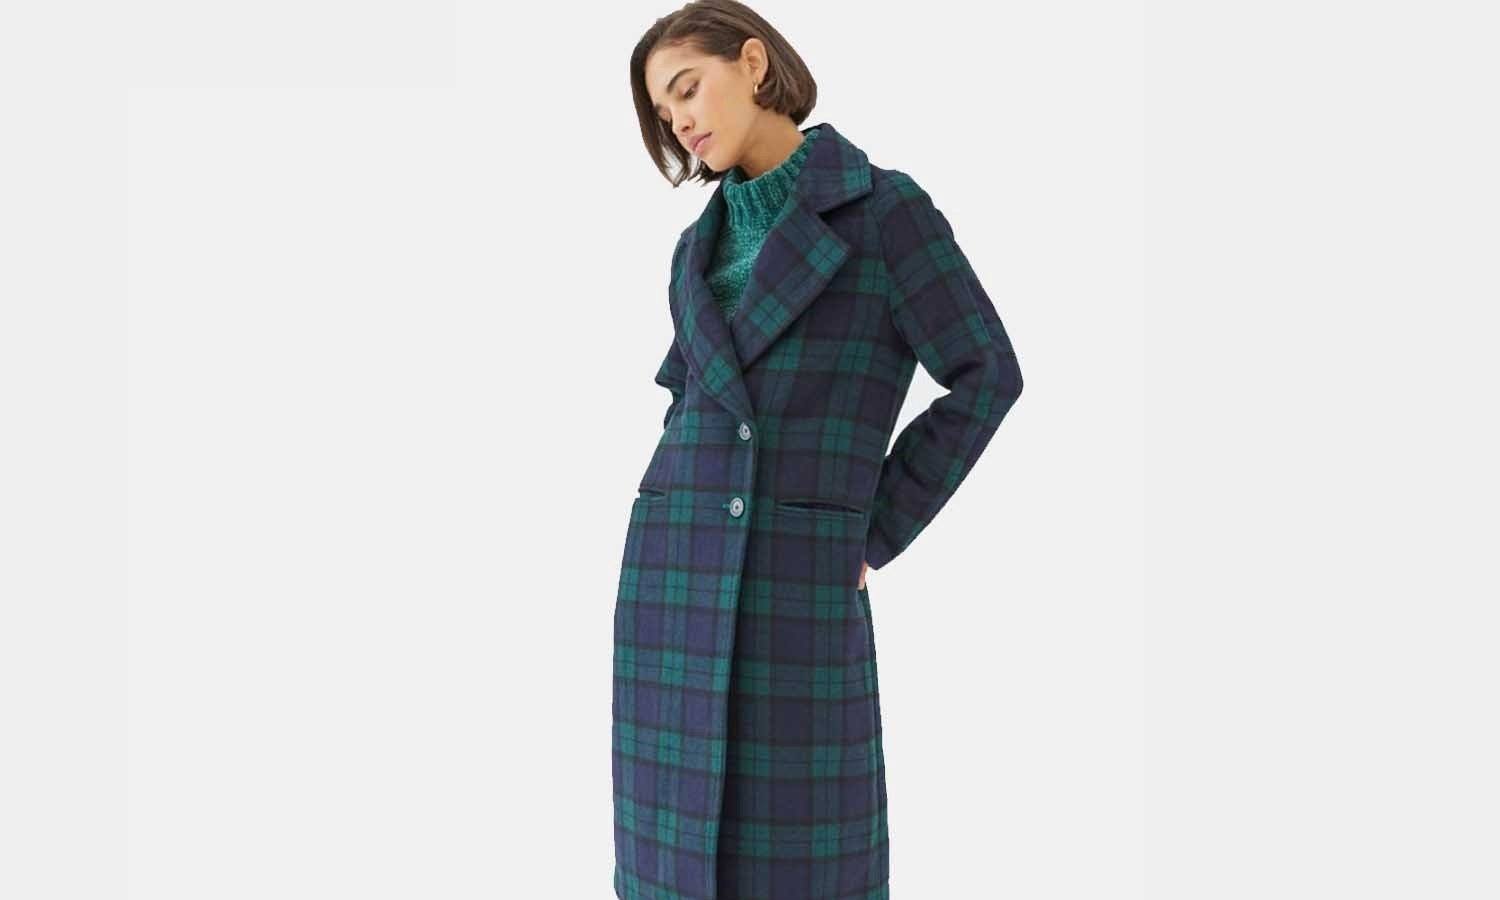 Buy the Woman in Your Life an Oversized Coat So That She Can Be More Like Taylor Swift